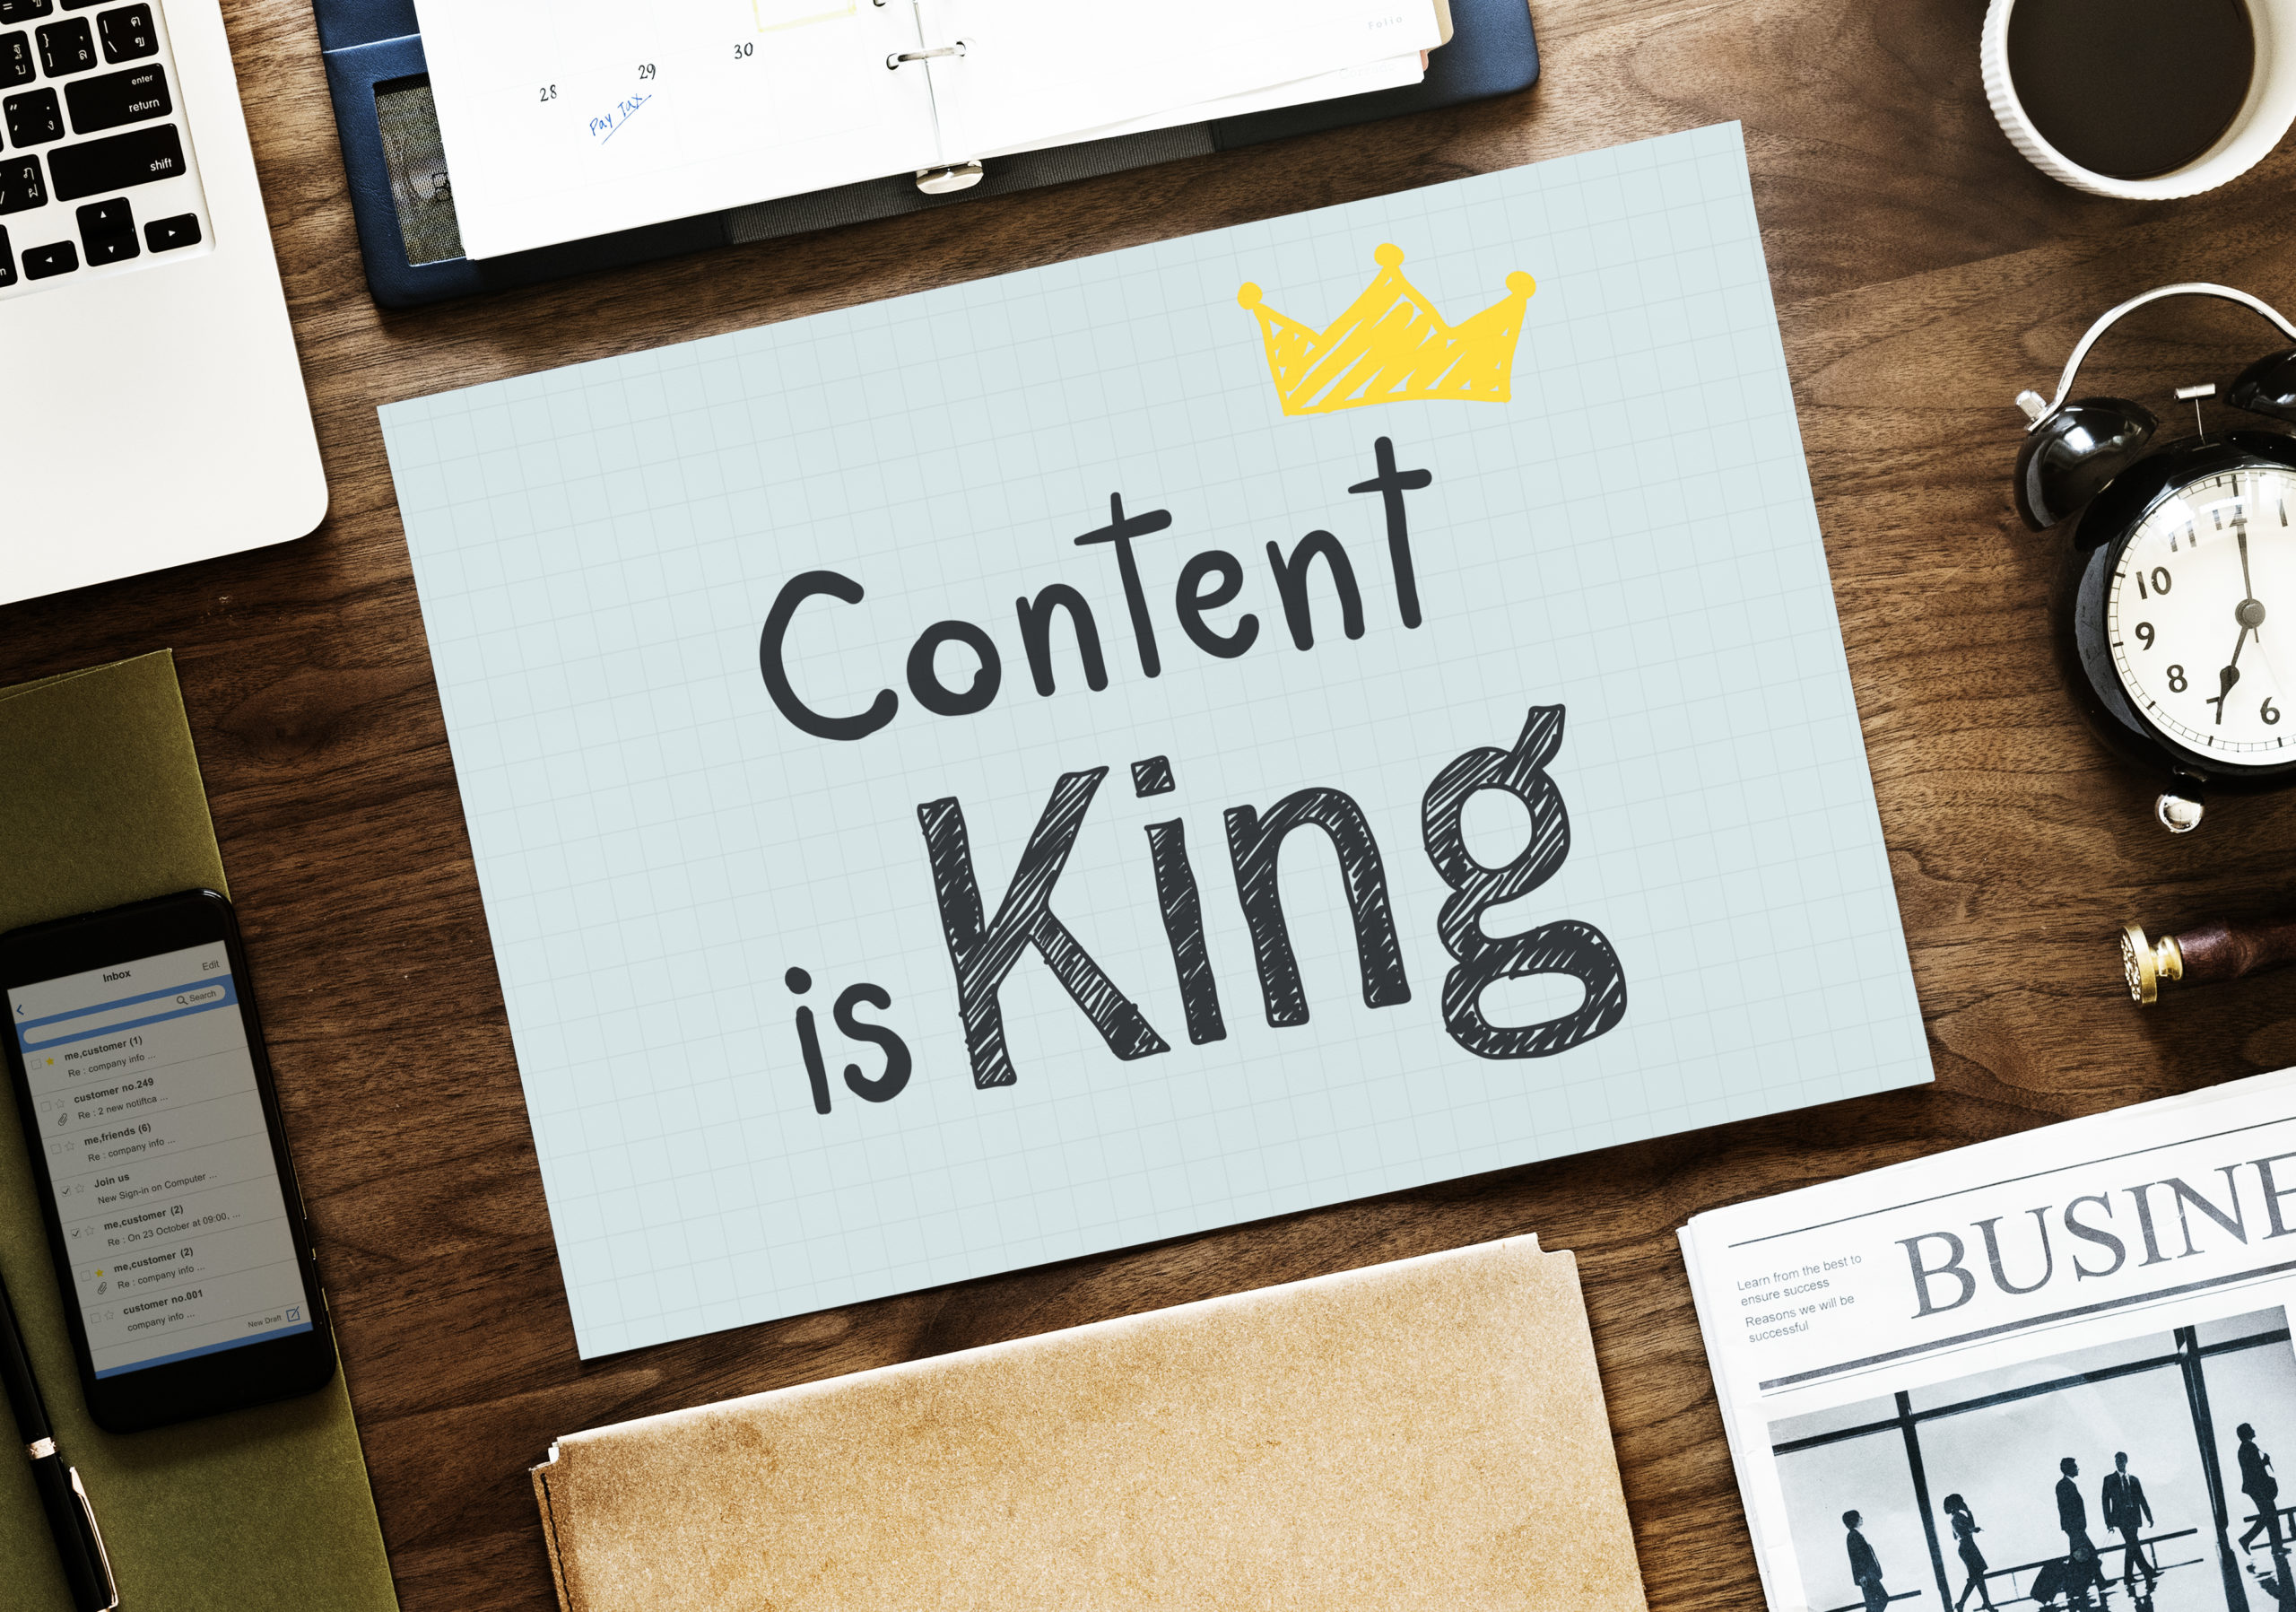 SEO vs. Content Marketing: The Main Differences